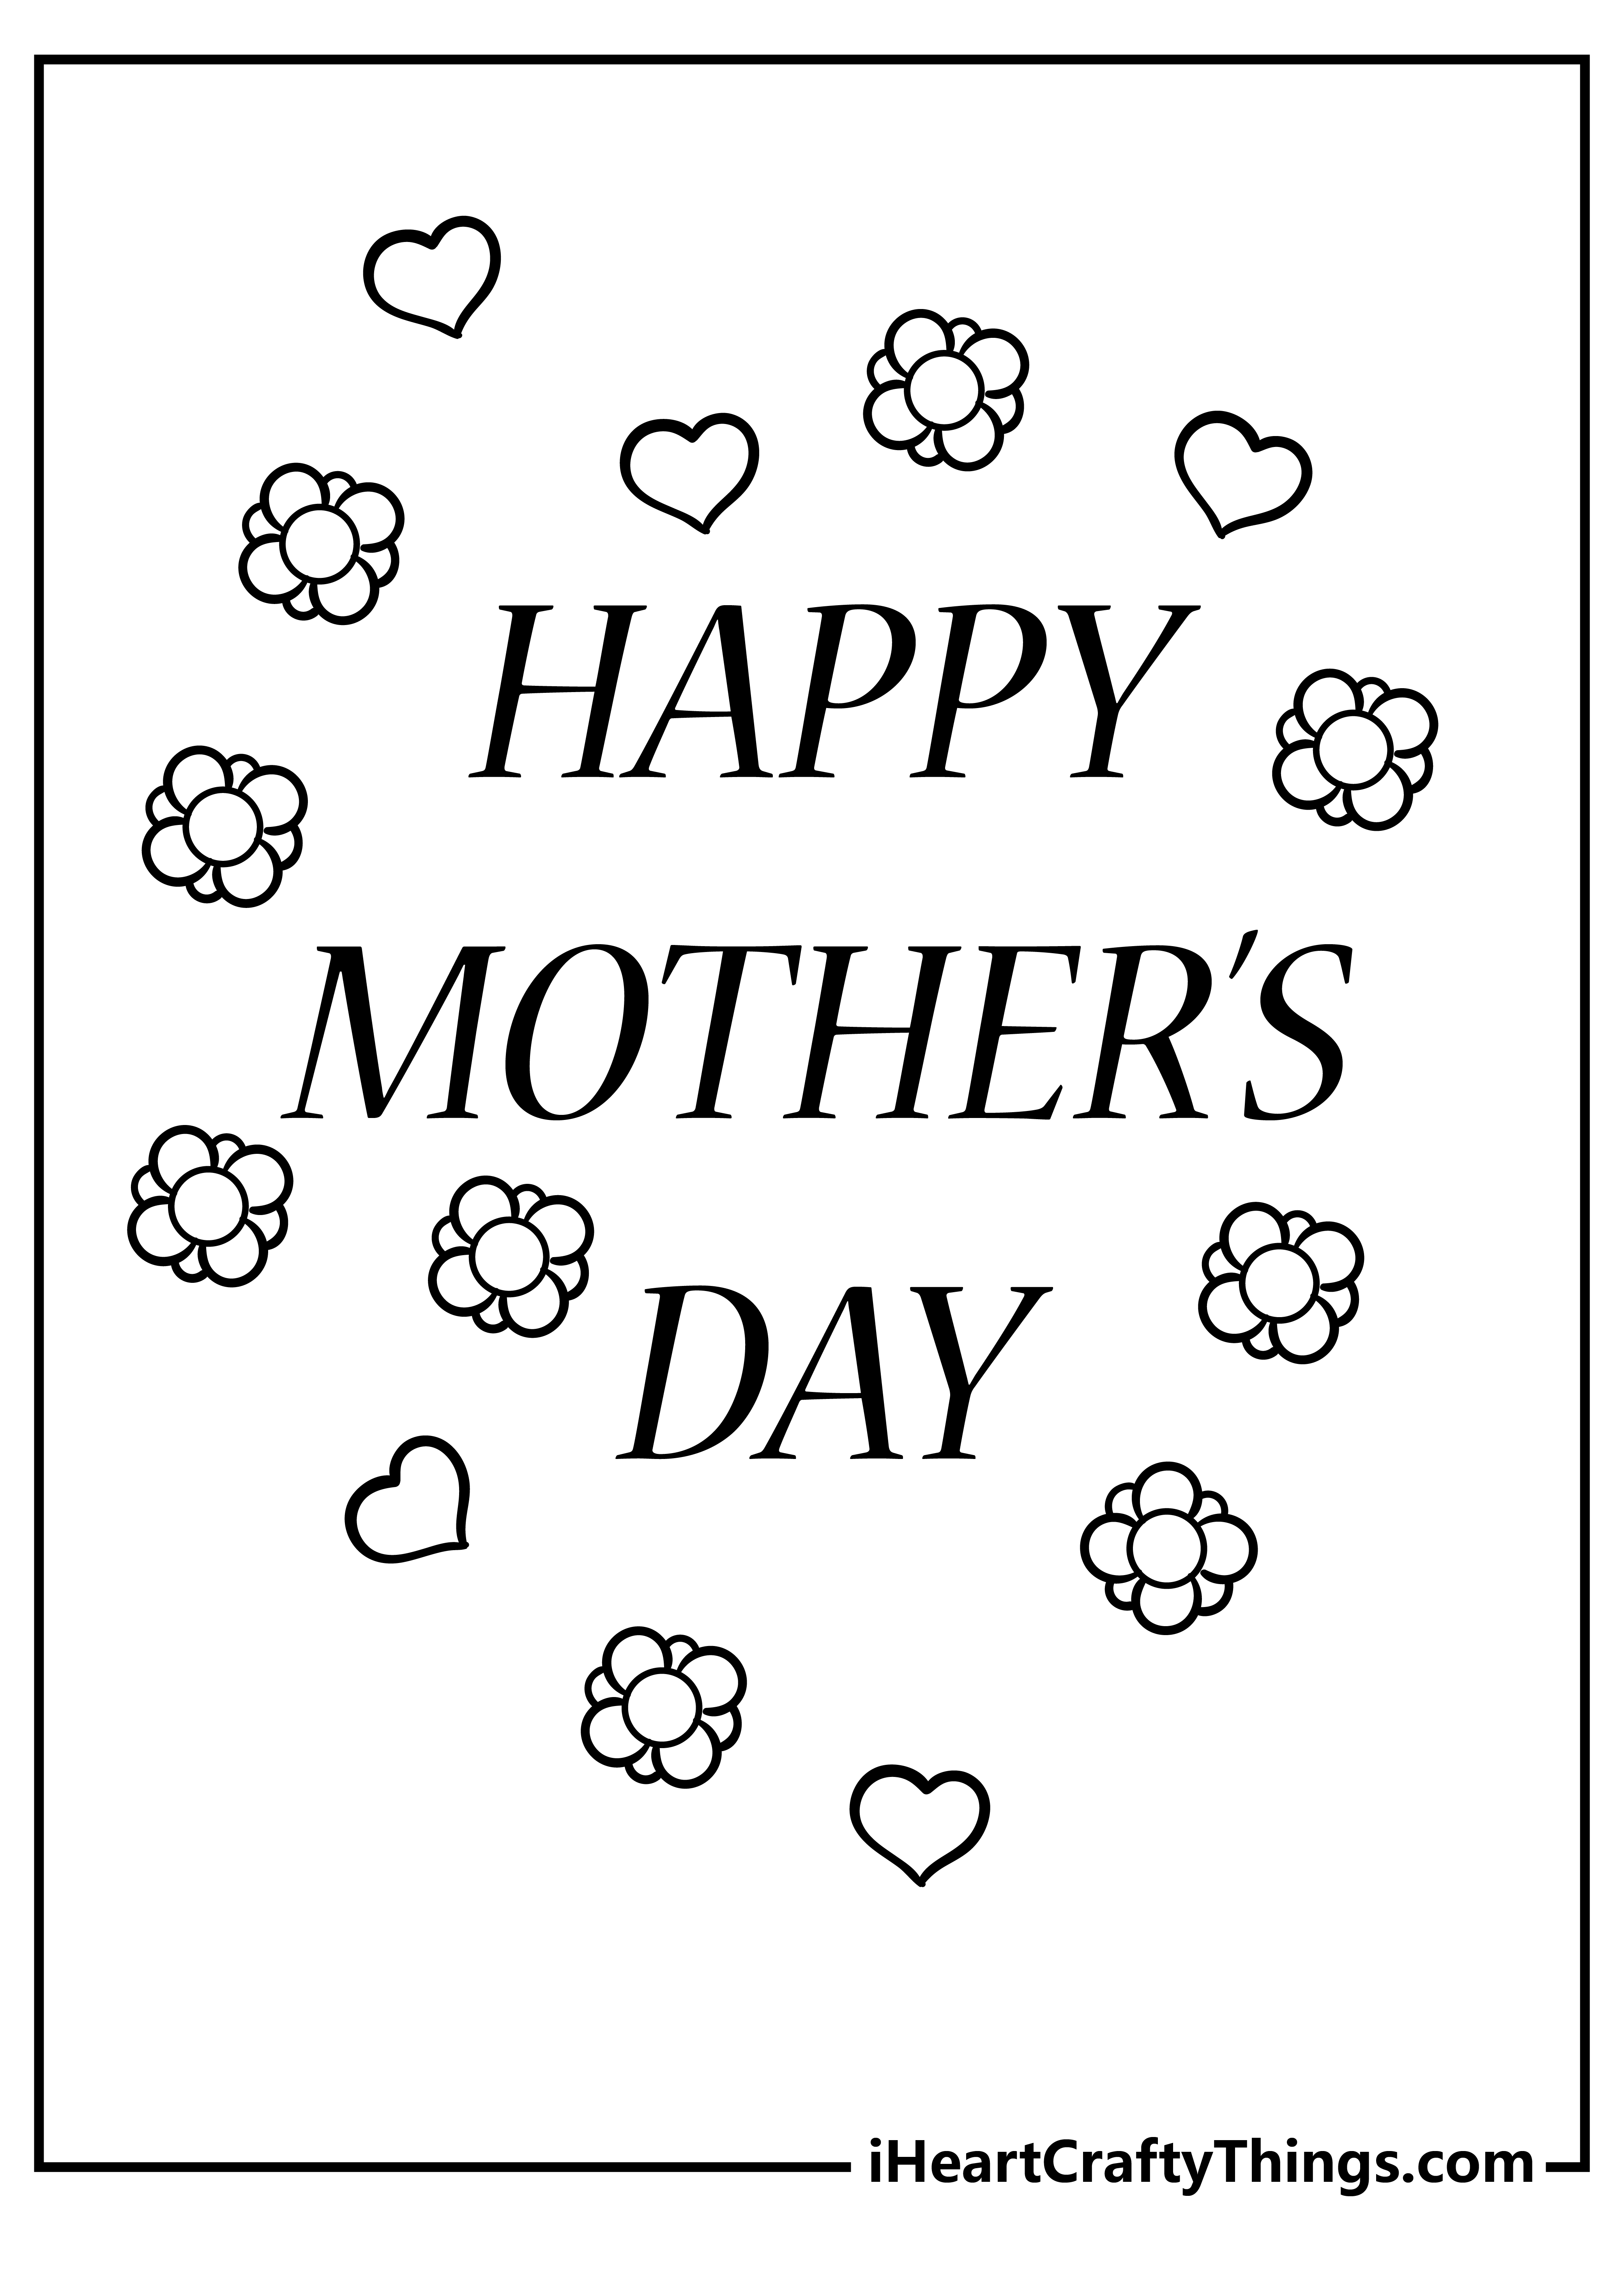 Mother’s Day Coloring Original Sheet for children free download